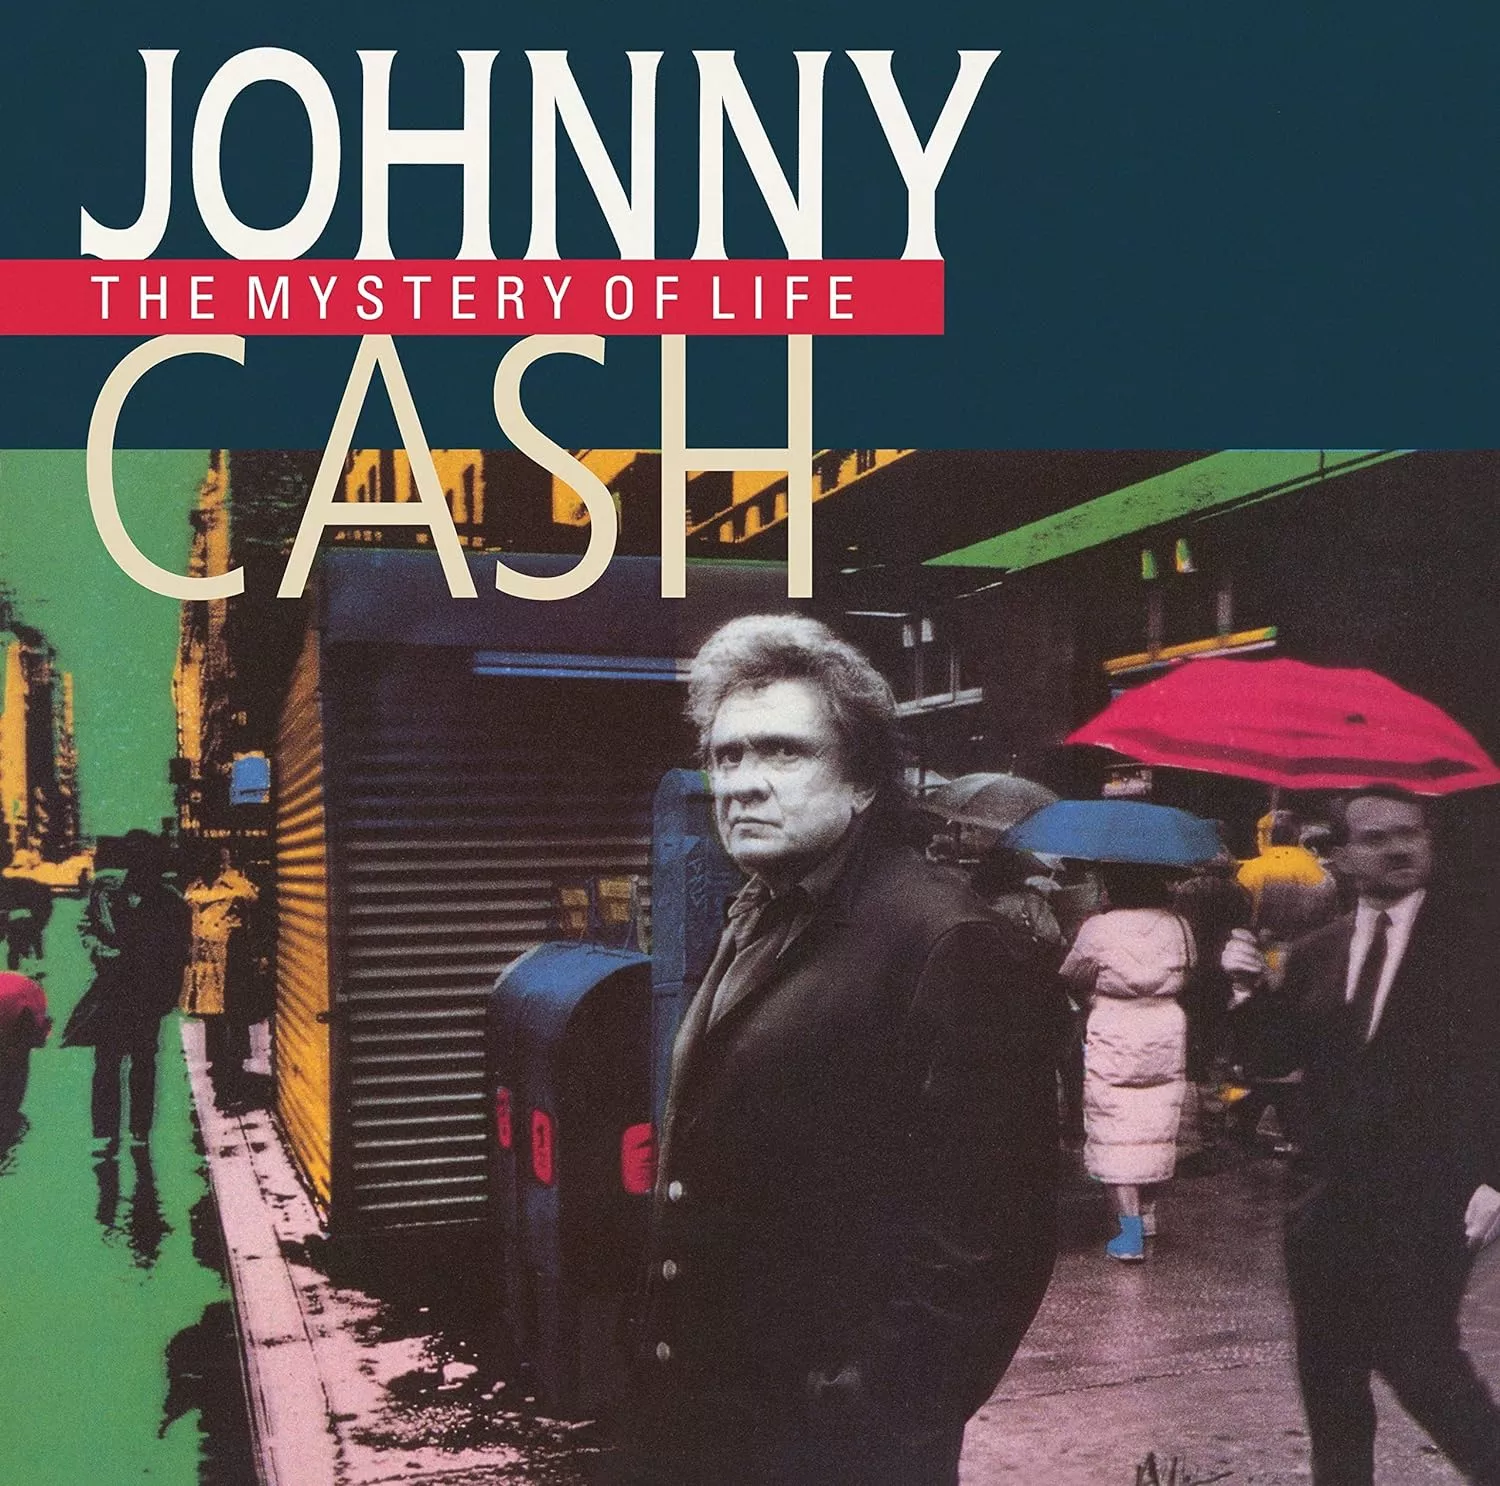 JOHNNY CASH - The Mystery Of Life (Remastered) [BLACK LP]